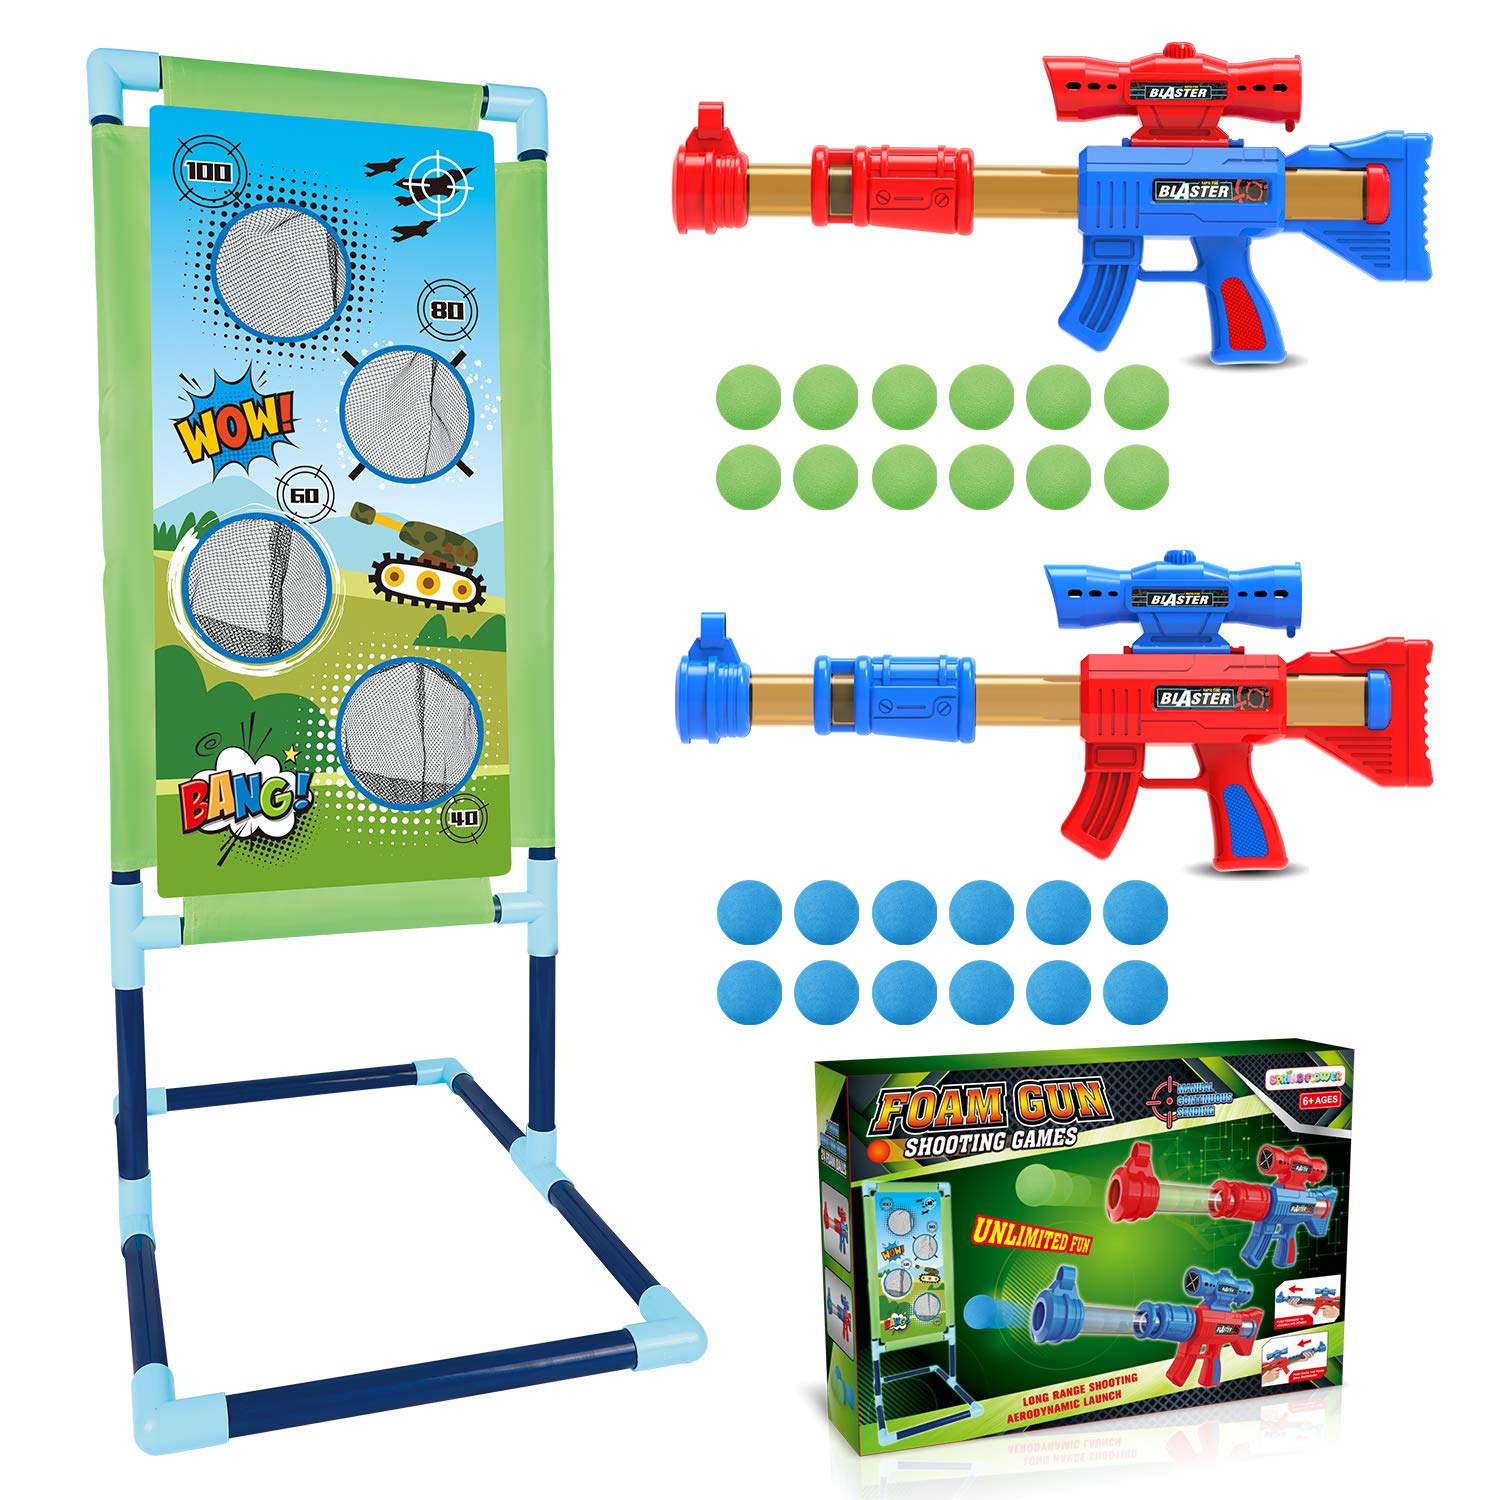 Family Foam Shooting Game Toy, Nerf Toys Compatible